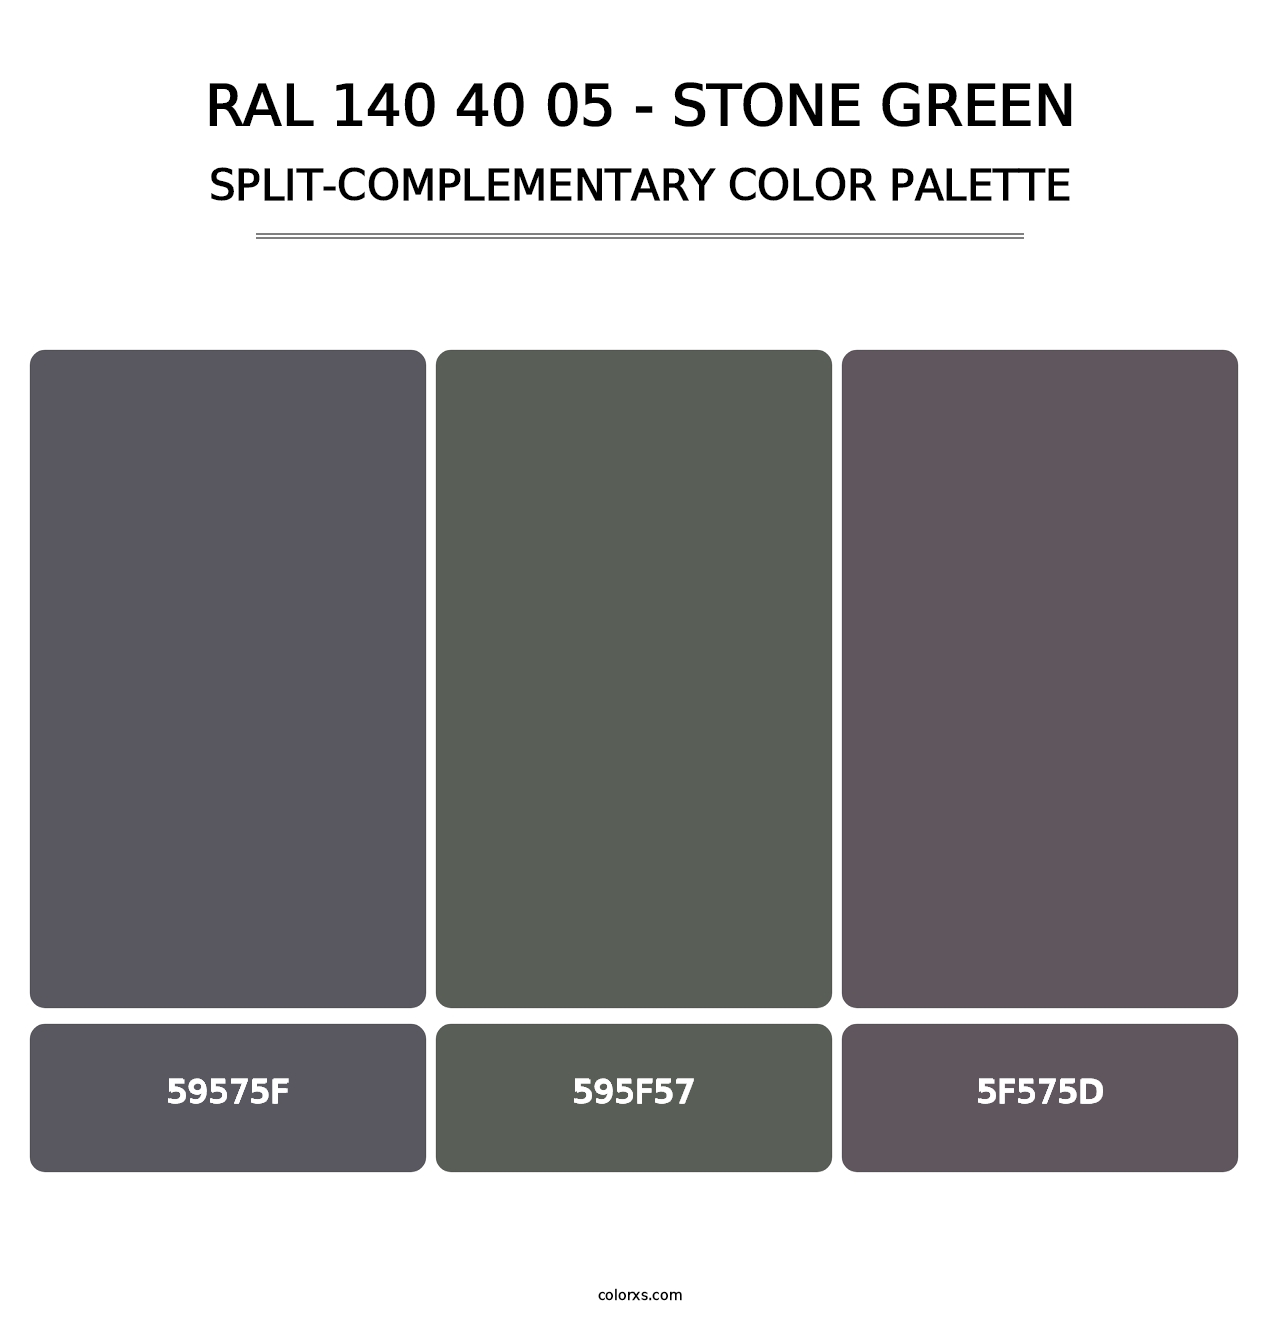 RAL 140 40 05 - Stone Green - Split-Complementary Color Palette